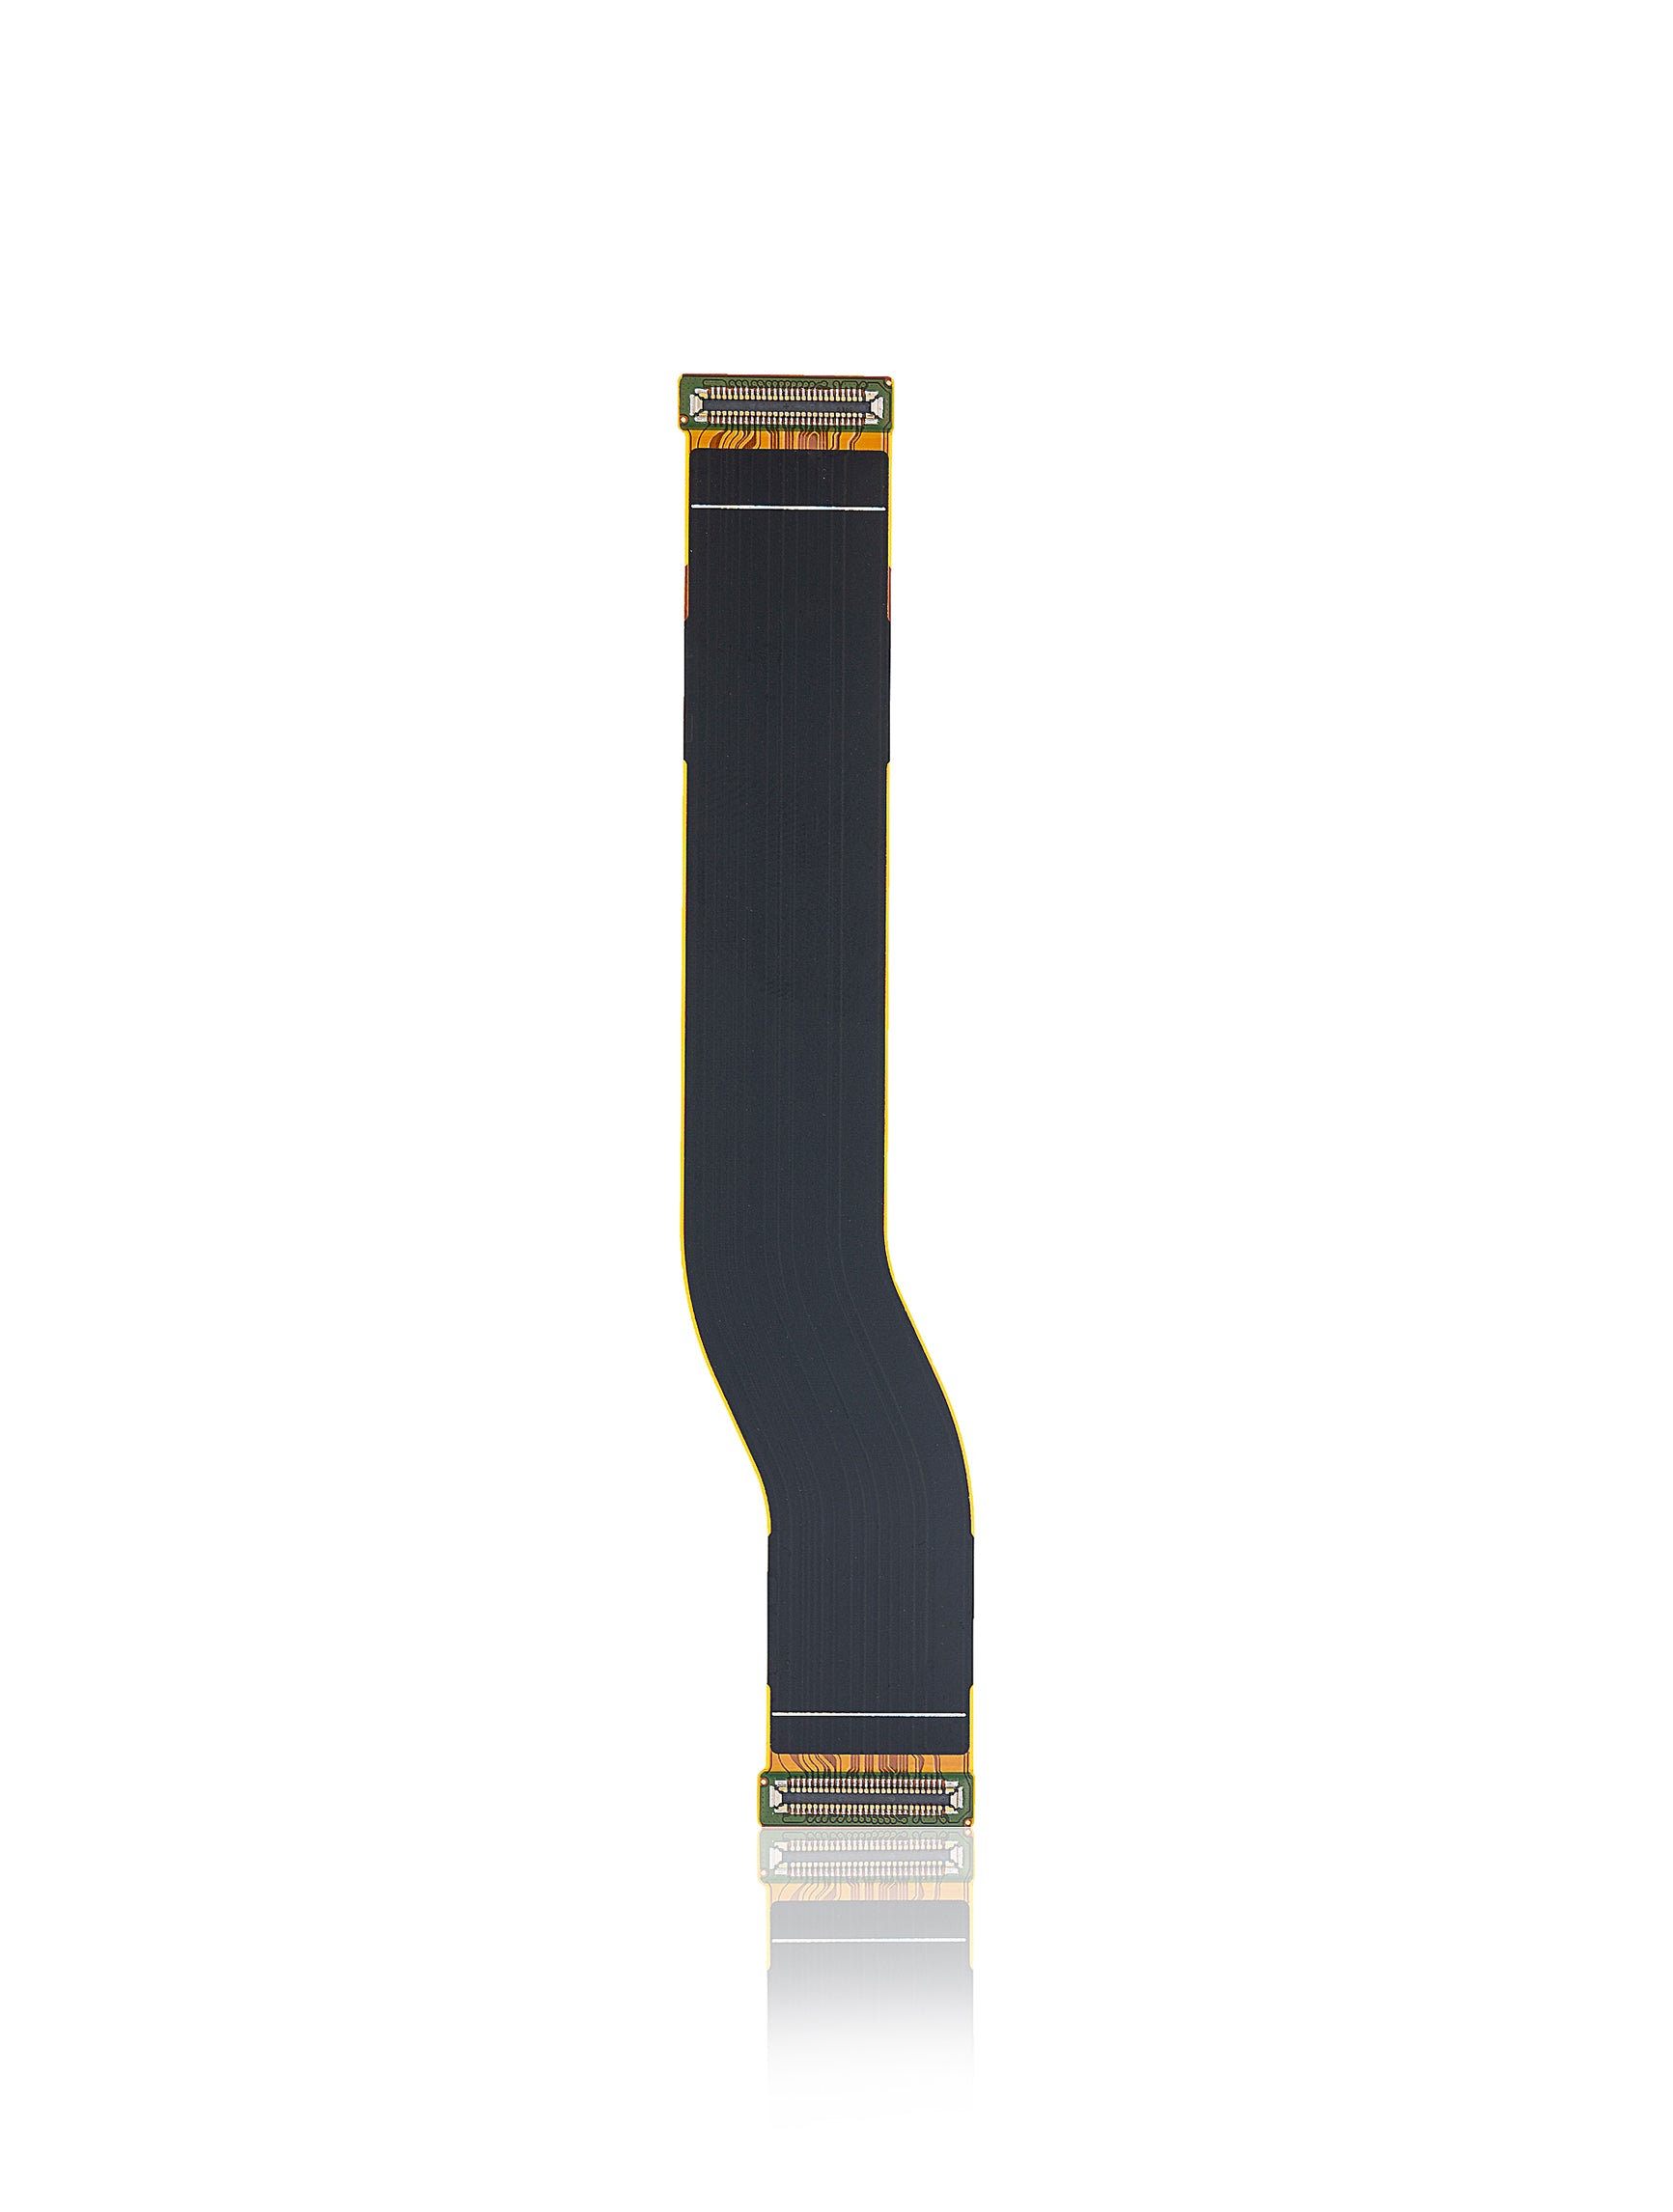 For Samsung Galaxy S20 Plus 5G Main Board Flex Cable Replacement